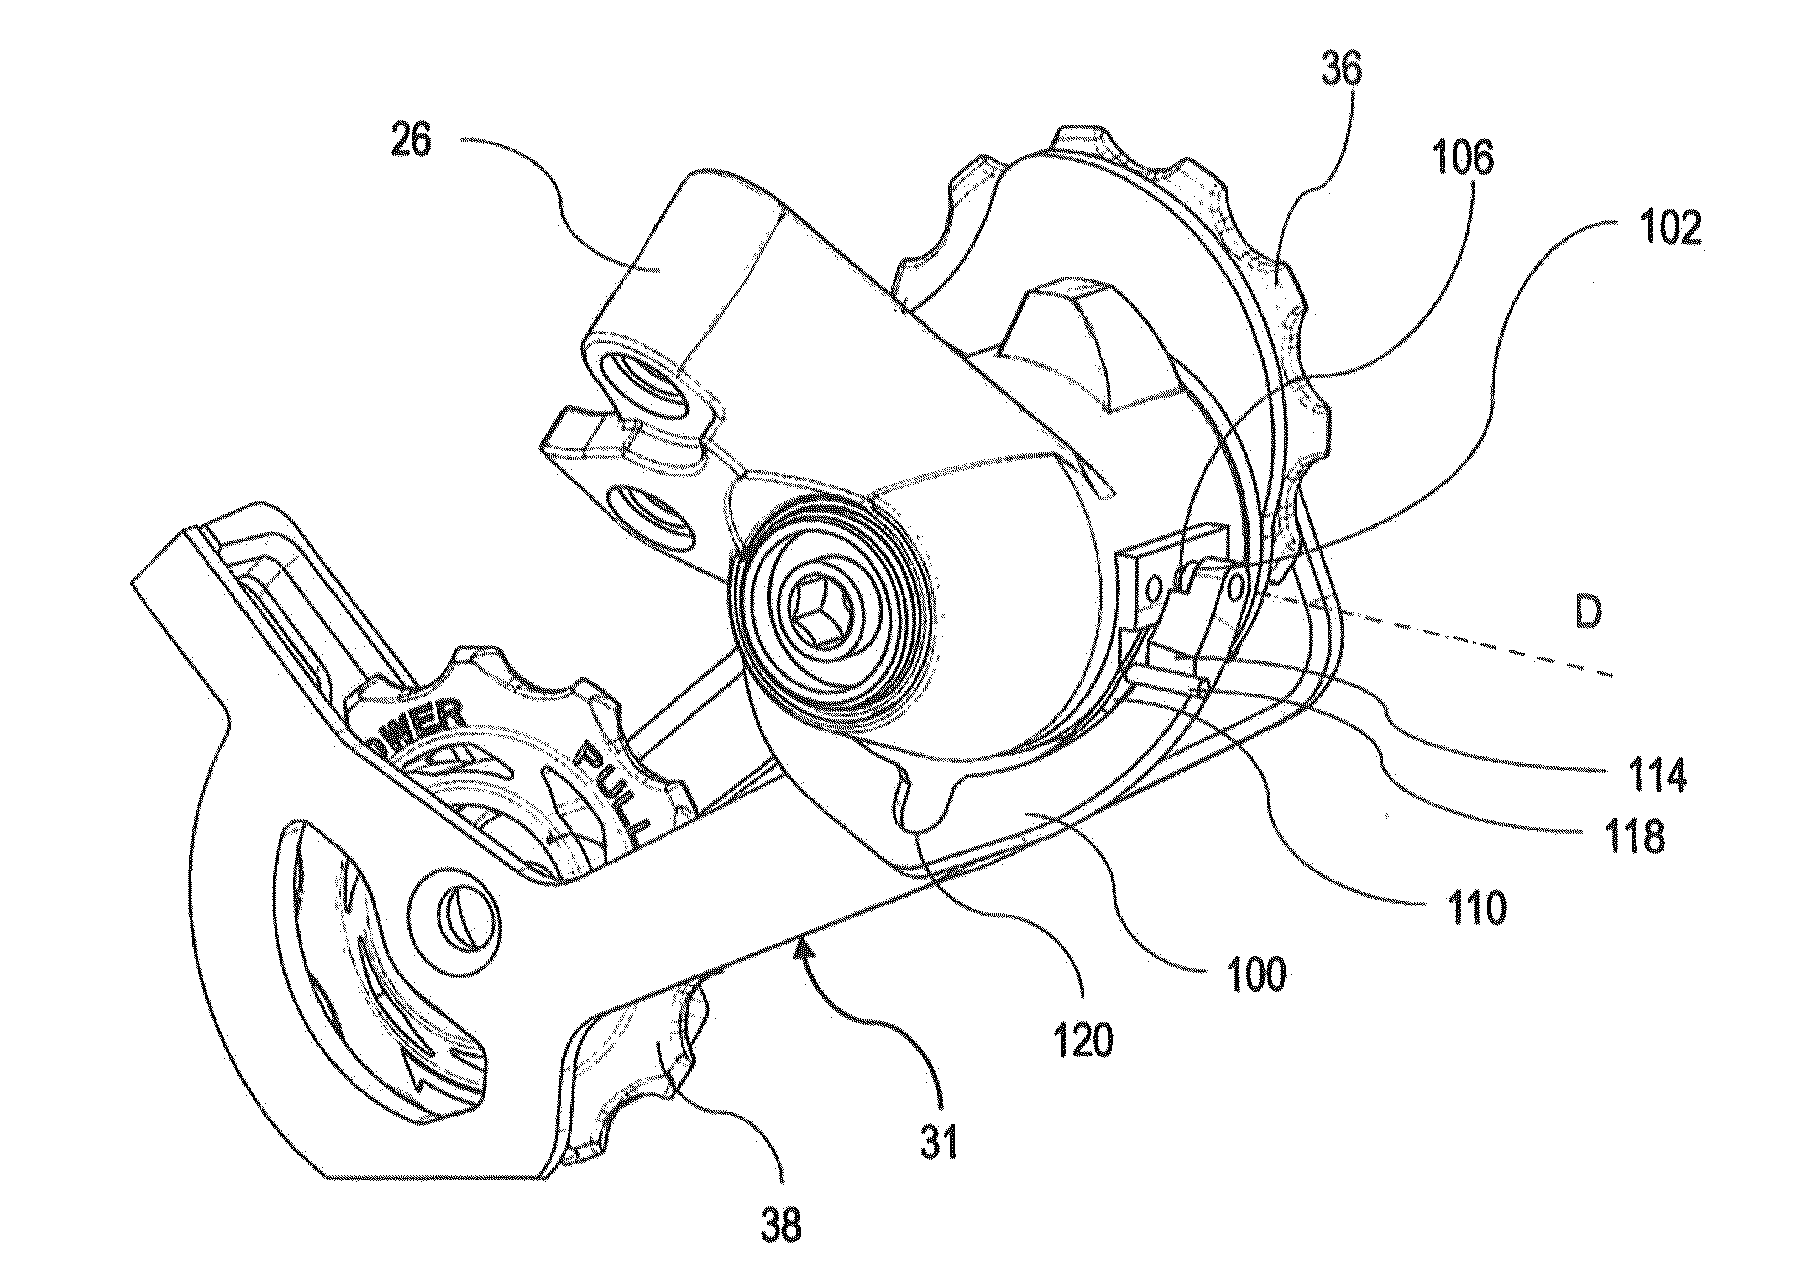 Rear derailleur device for a bicycle shifting system